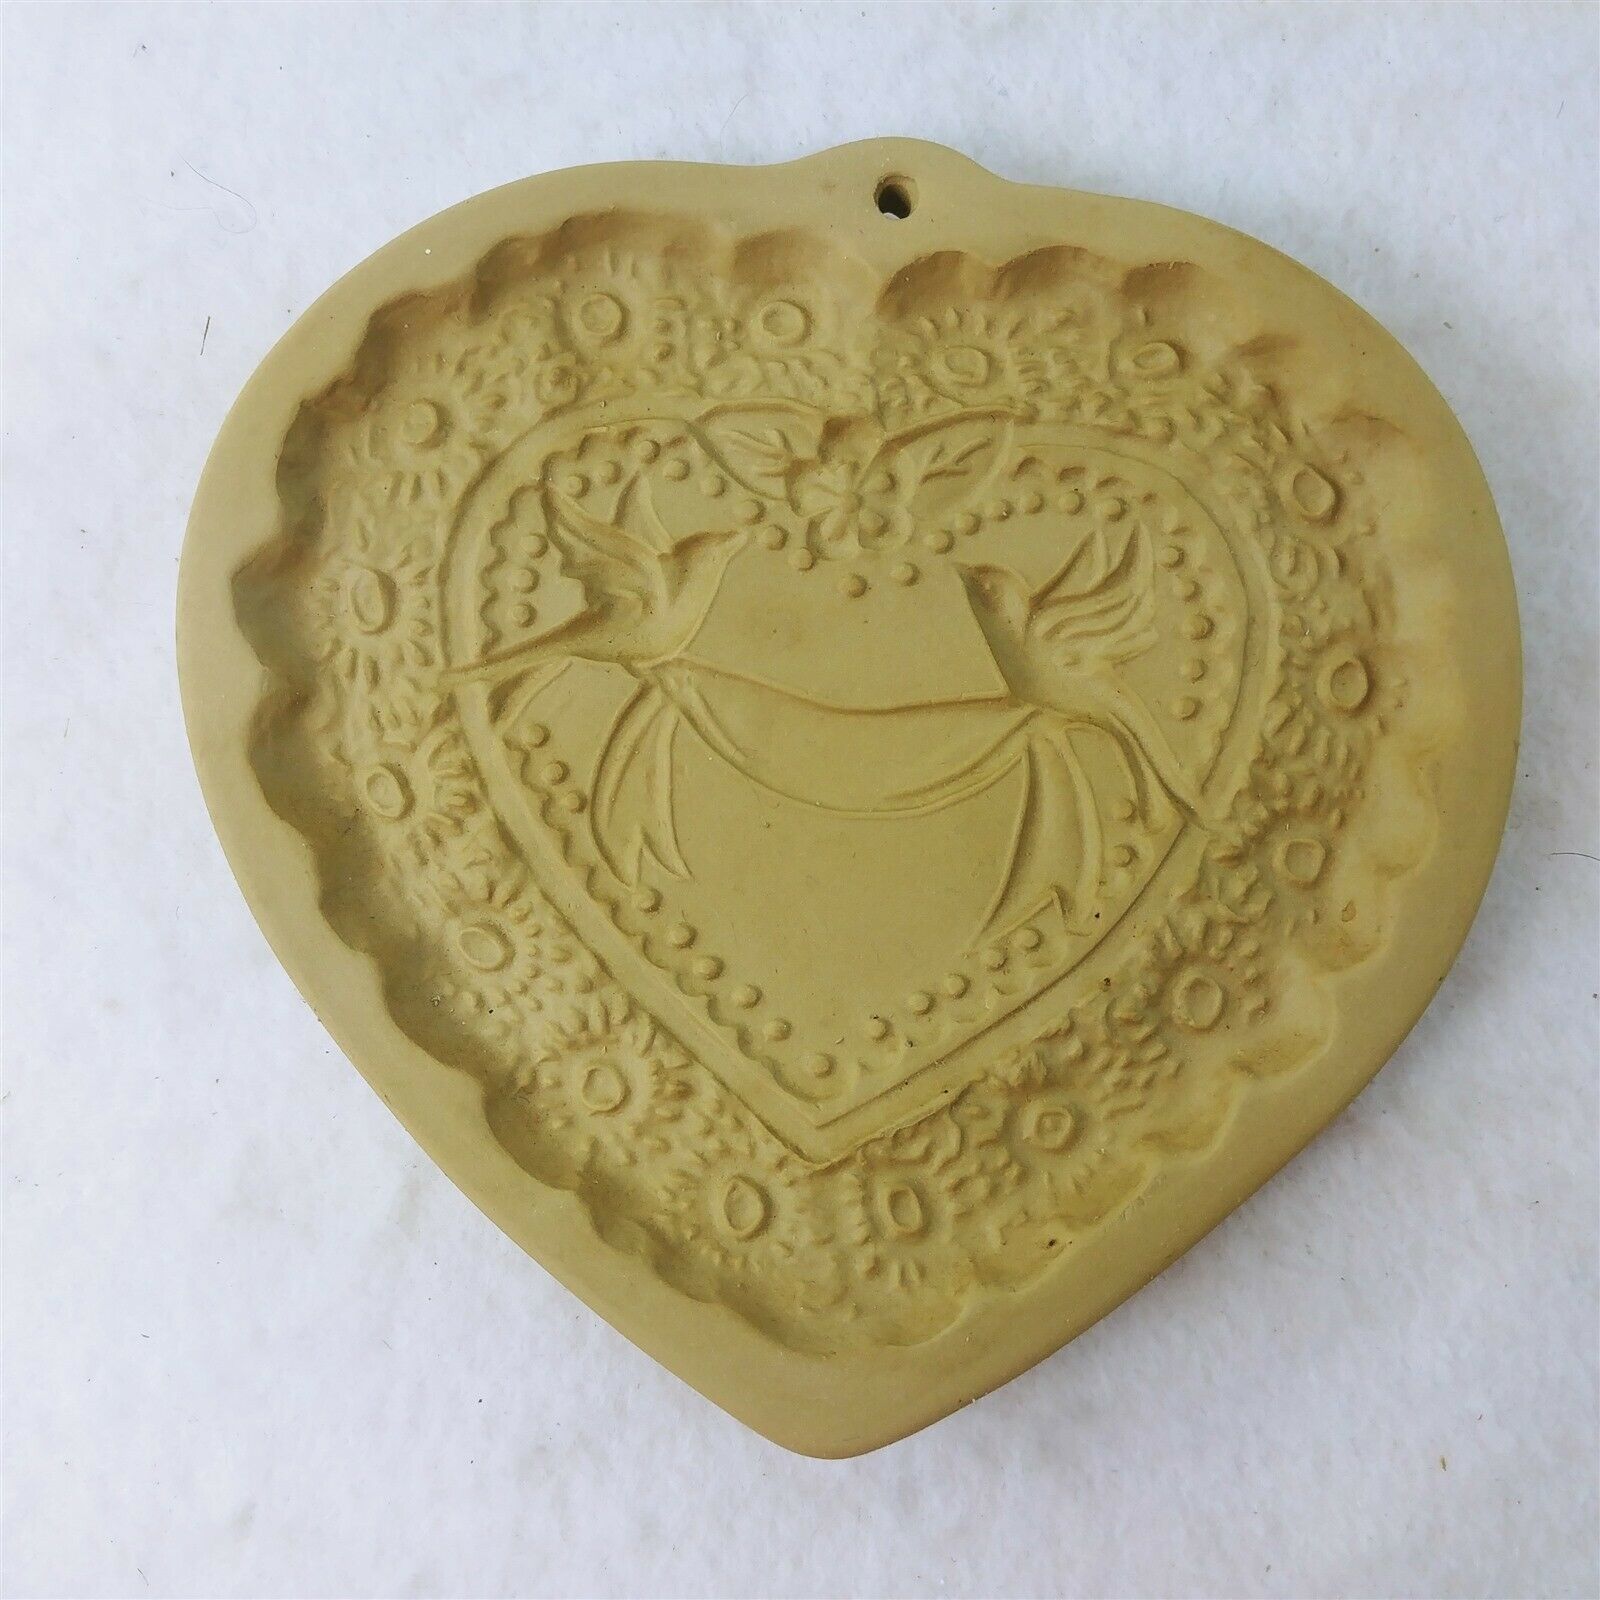 Primary image for Wall Plaque Cookie Mold Brown Bag Cookie Art Co 1985 Heart and Doves Stoneware